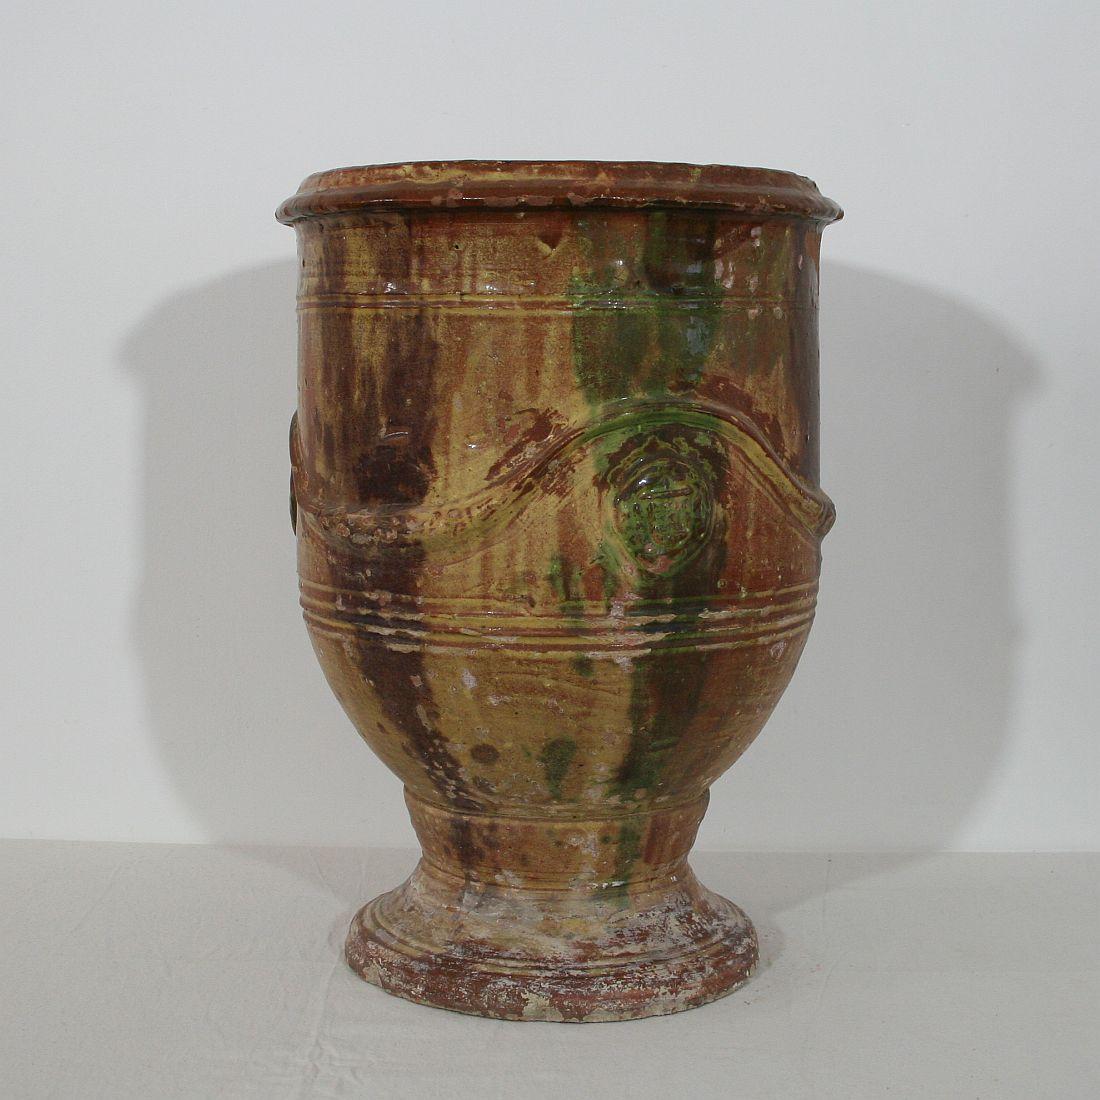 Great and rare Anduze vase with a beautiful glaze, decor and weathered look.
France, circa 1850-1900.
Weathered but very good condition.
 